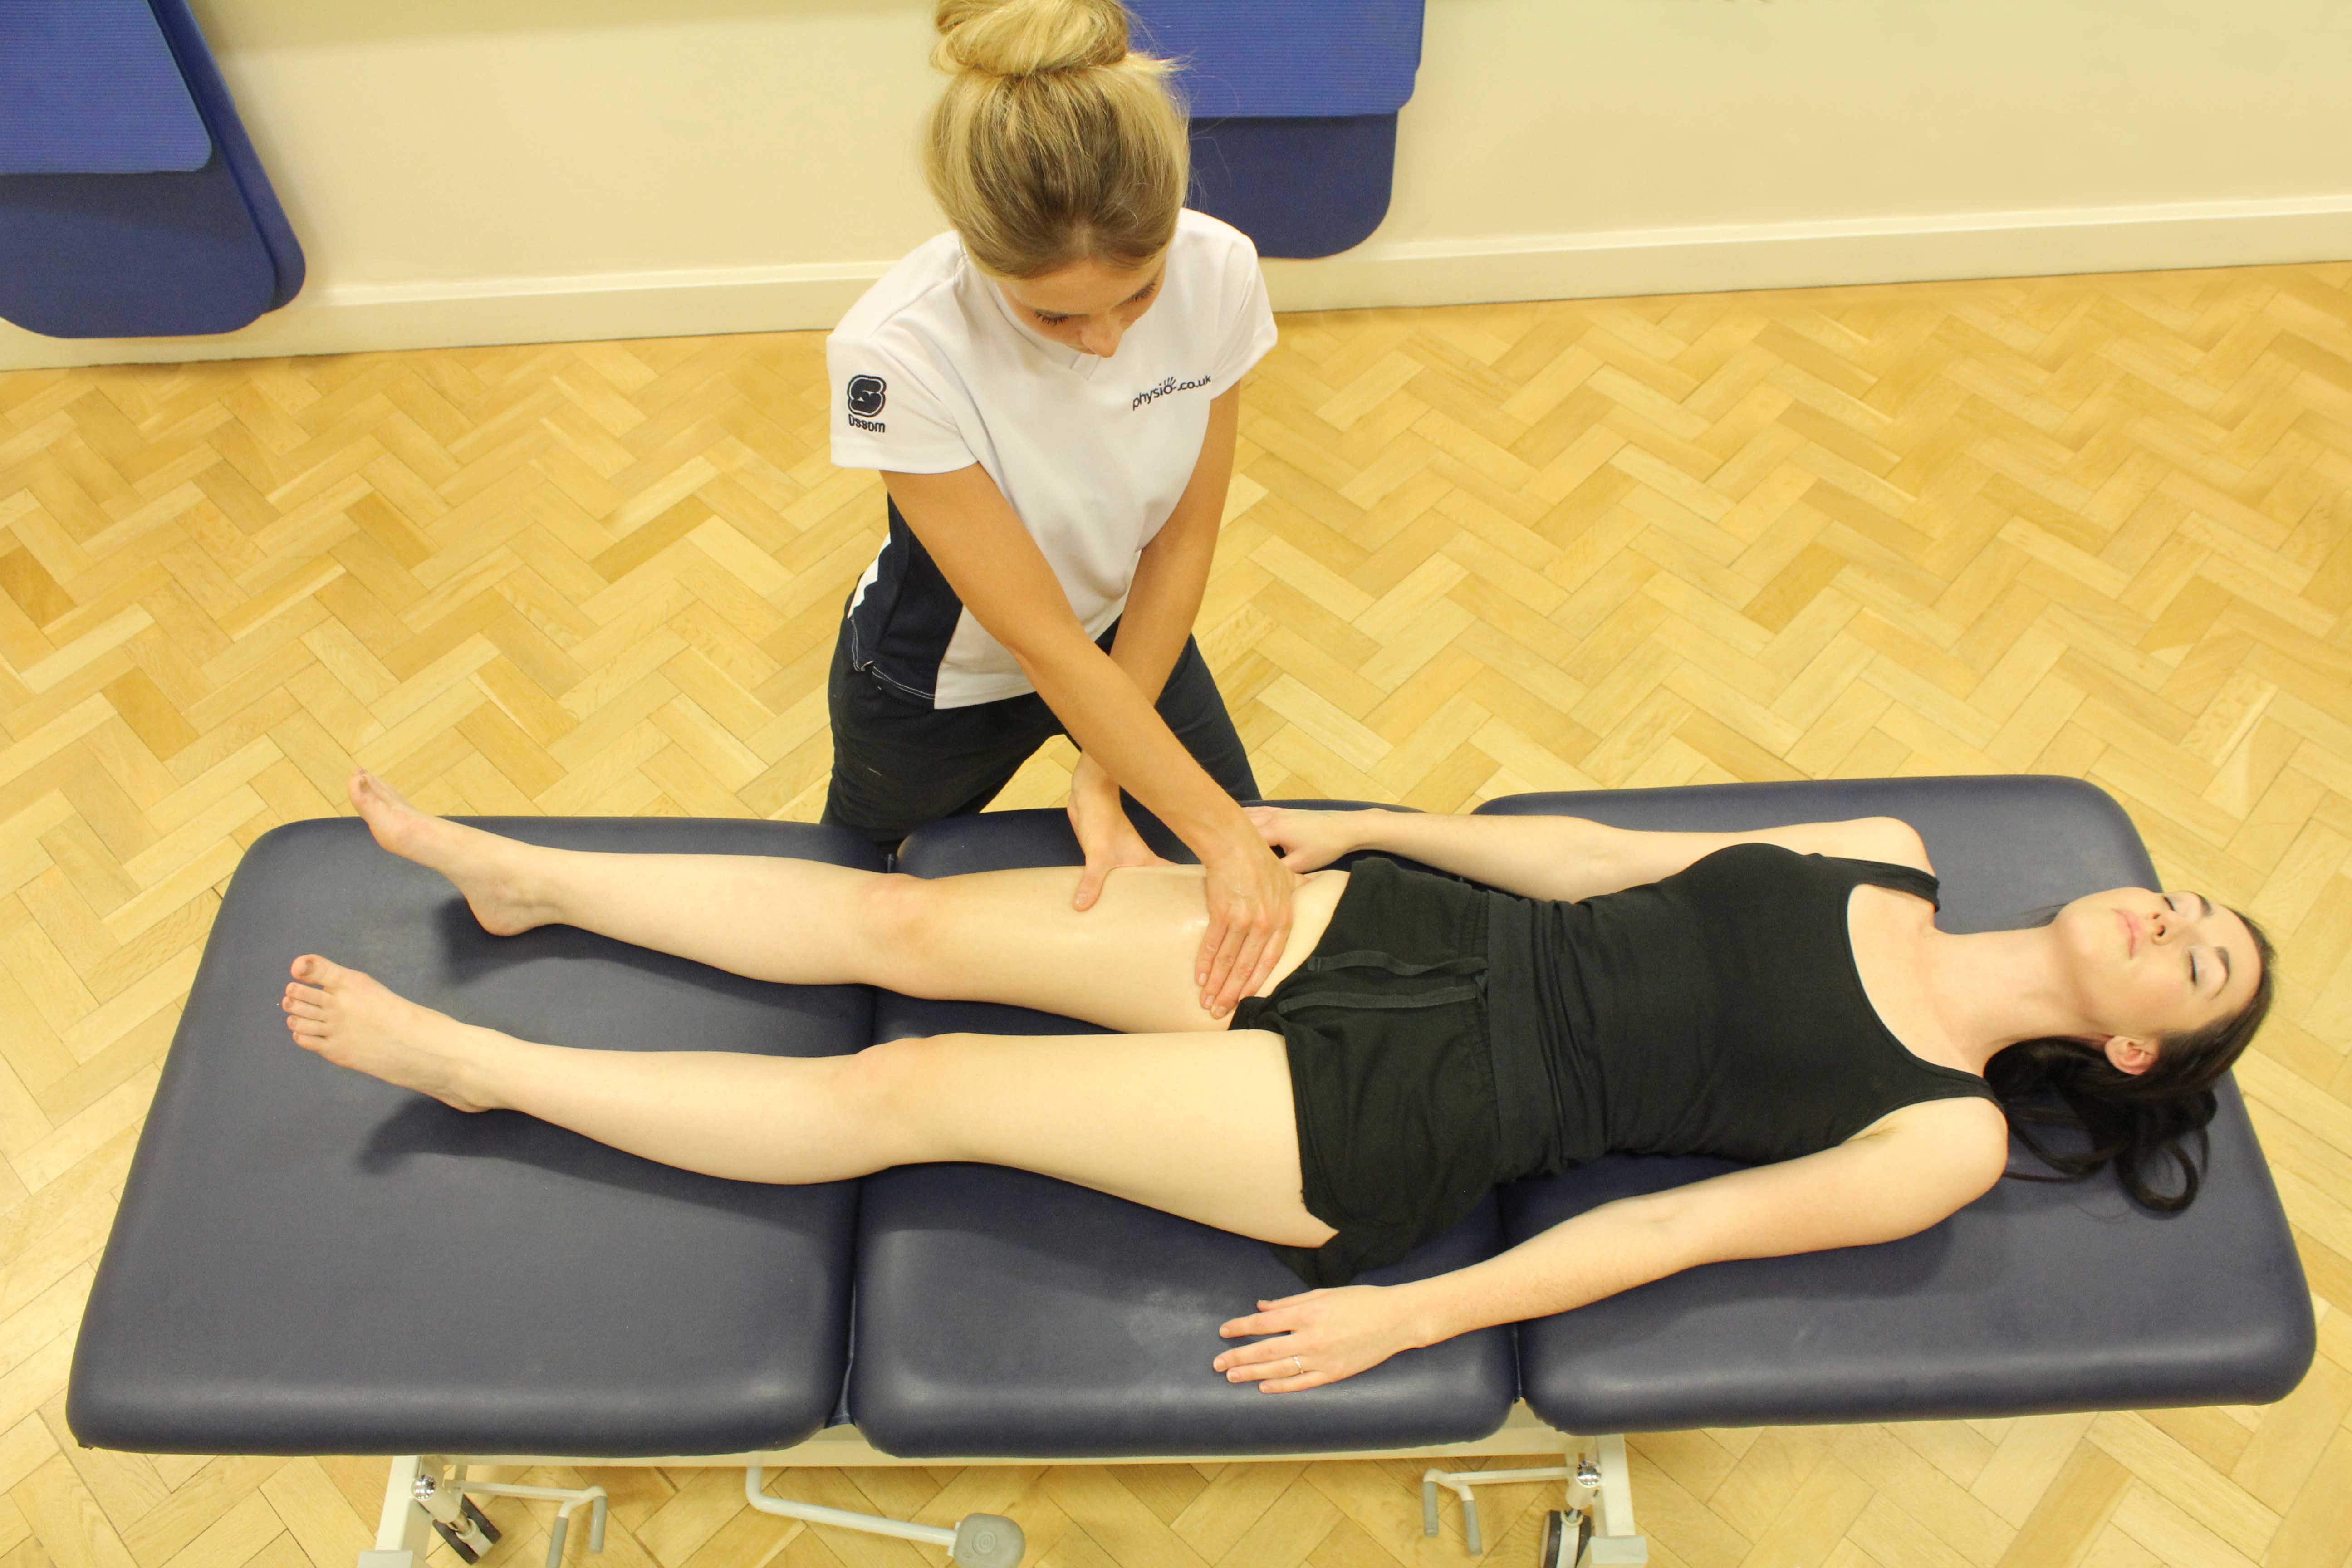 Soft tissue massage of the muscles and connective tissues around the groin by an experienced therapist